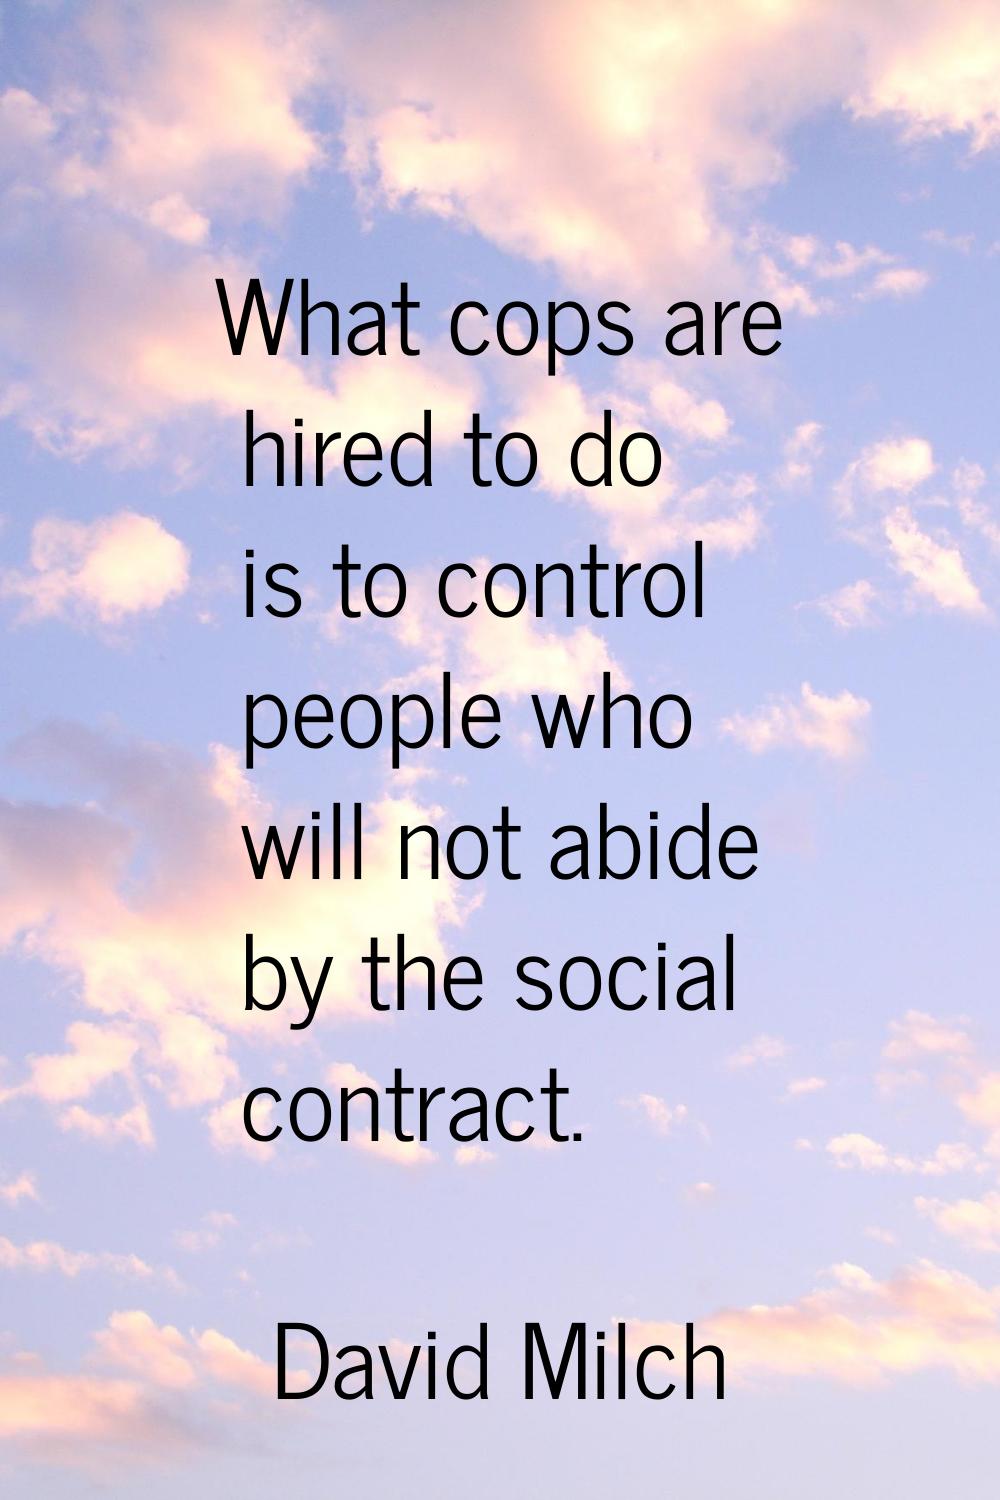 What cops are hired to do is to control people who will not abide by the social contract.